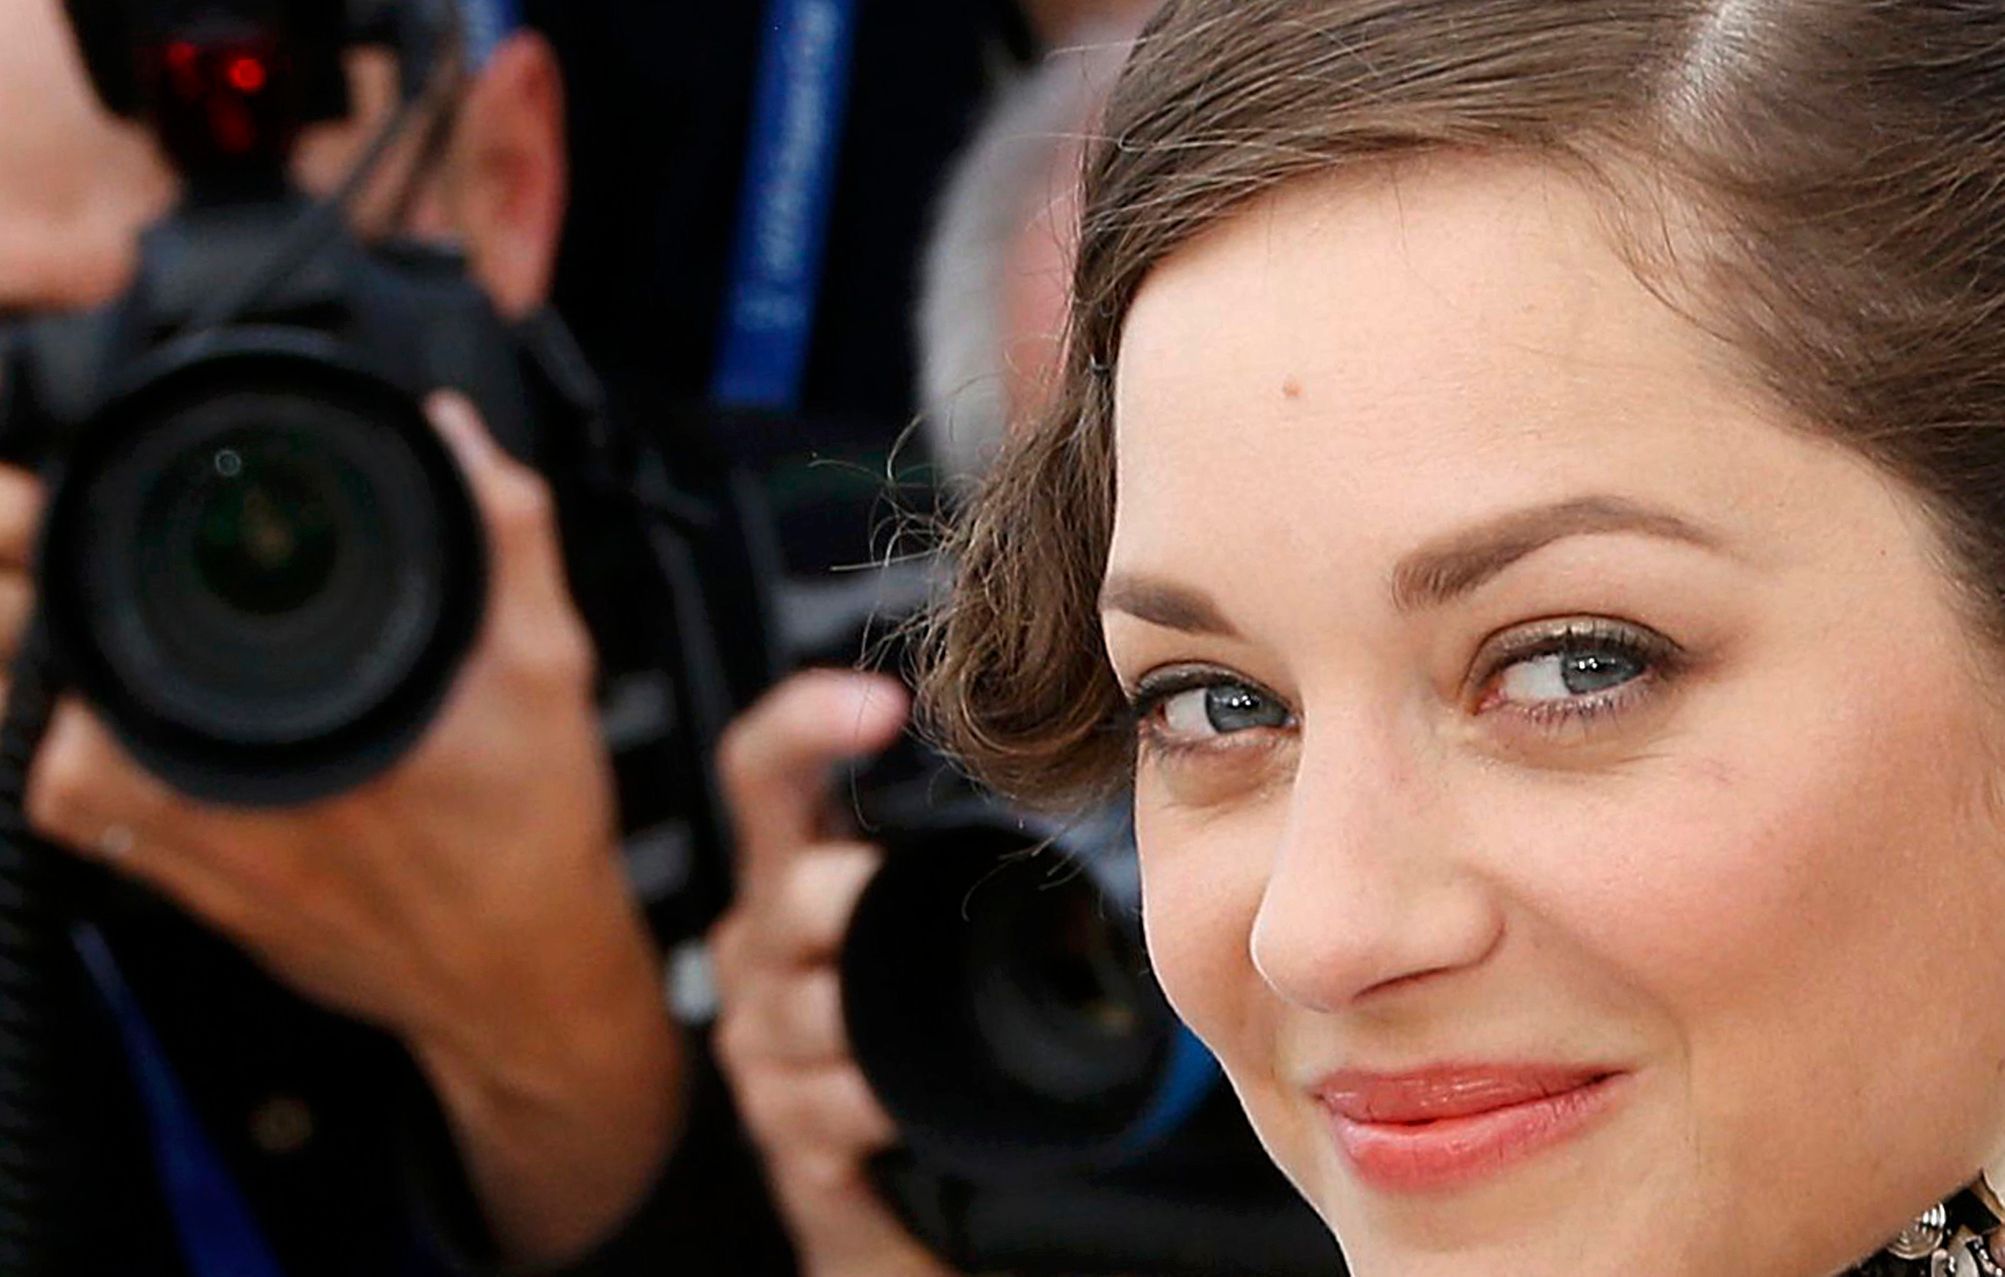 Cast member Marion Cotillard poses during a photocall for the film &quot;Deux jours, une nuit&quot; in competition at the 67th Cannes Film Festival in Cannes